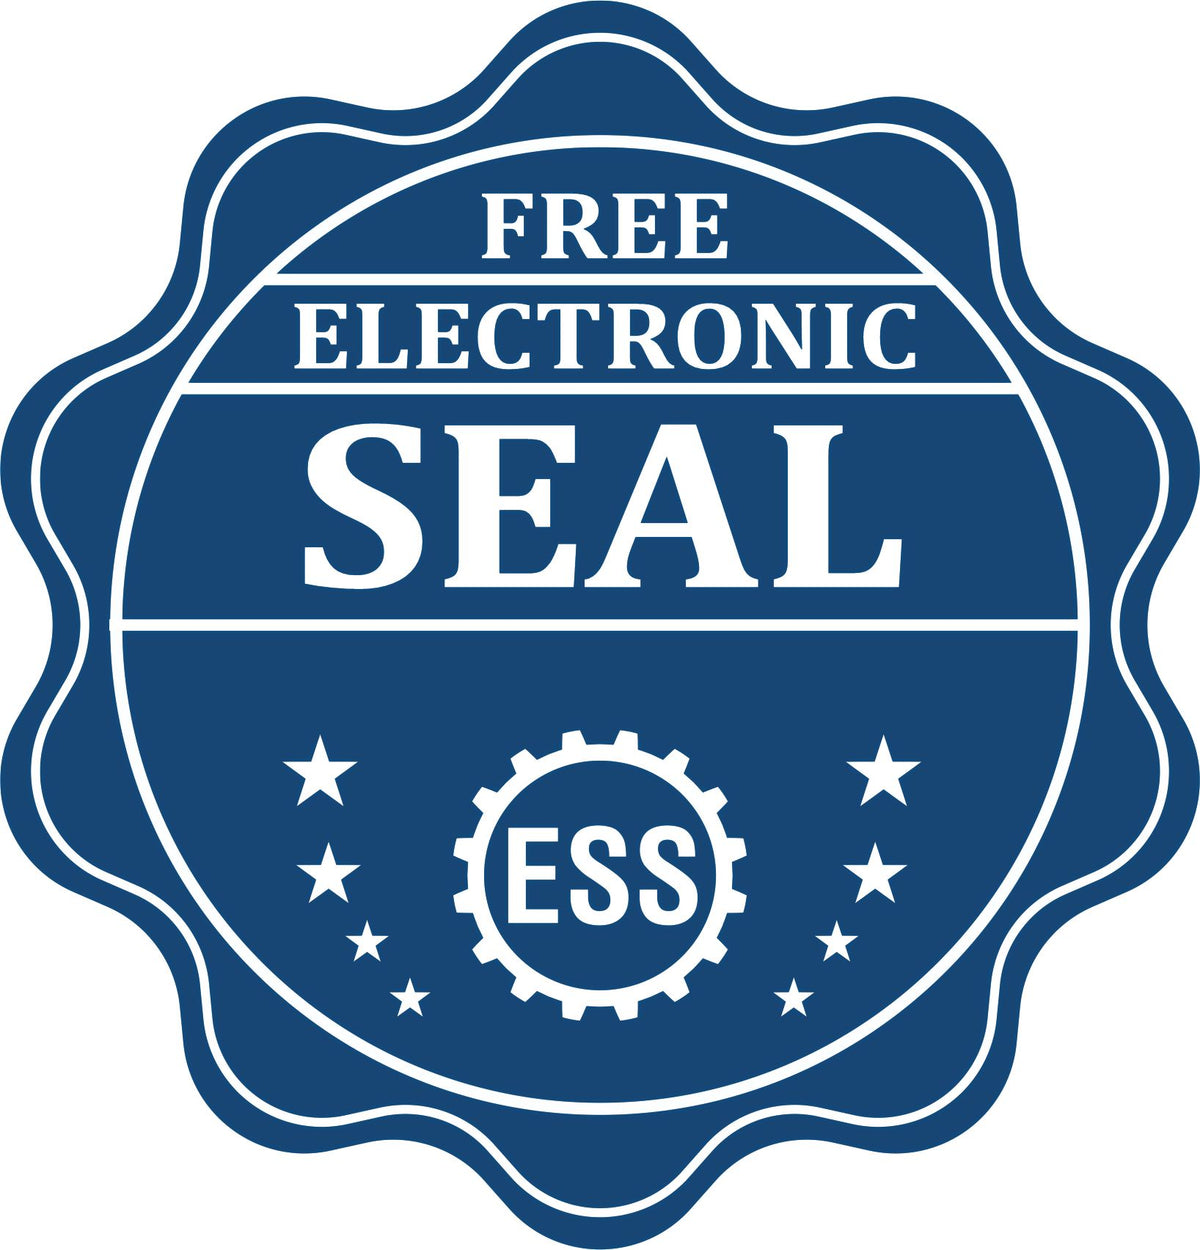 A badge showing a free electronic seal for the Hybrid Delaware Engineer Seal with stars and the ESS gear on the emblem.